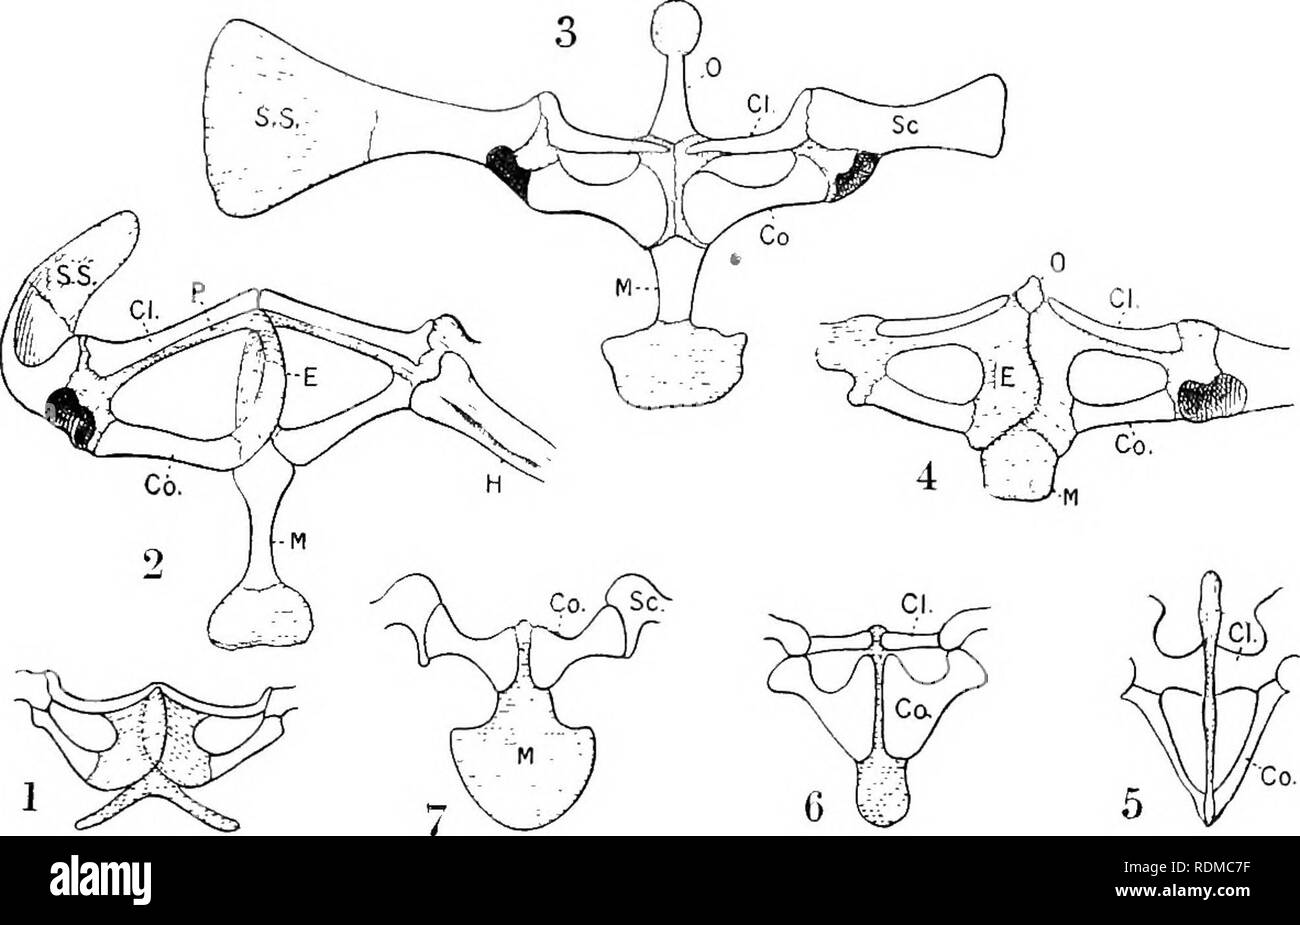 The Cambridge natural history. Zoology. SHOULDER-GIRDLE 25 and the median  symphysial luir of cartilage is lost; this is the case in Hrviisiw. The  scapula is always large and curved into tra.nsverse